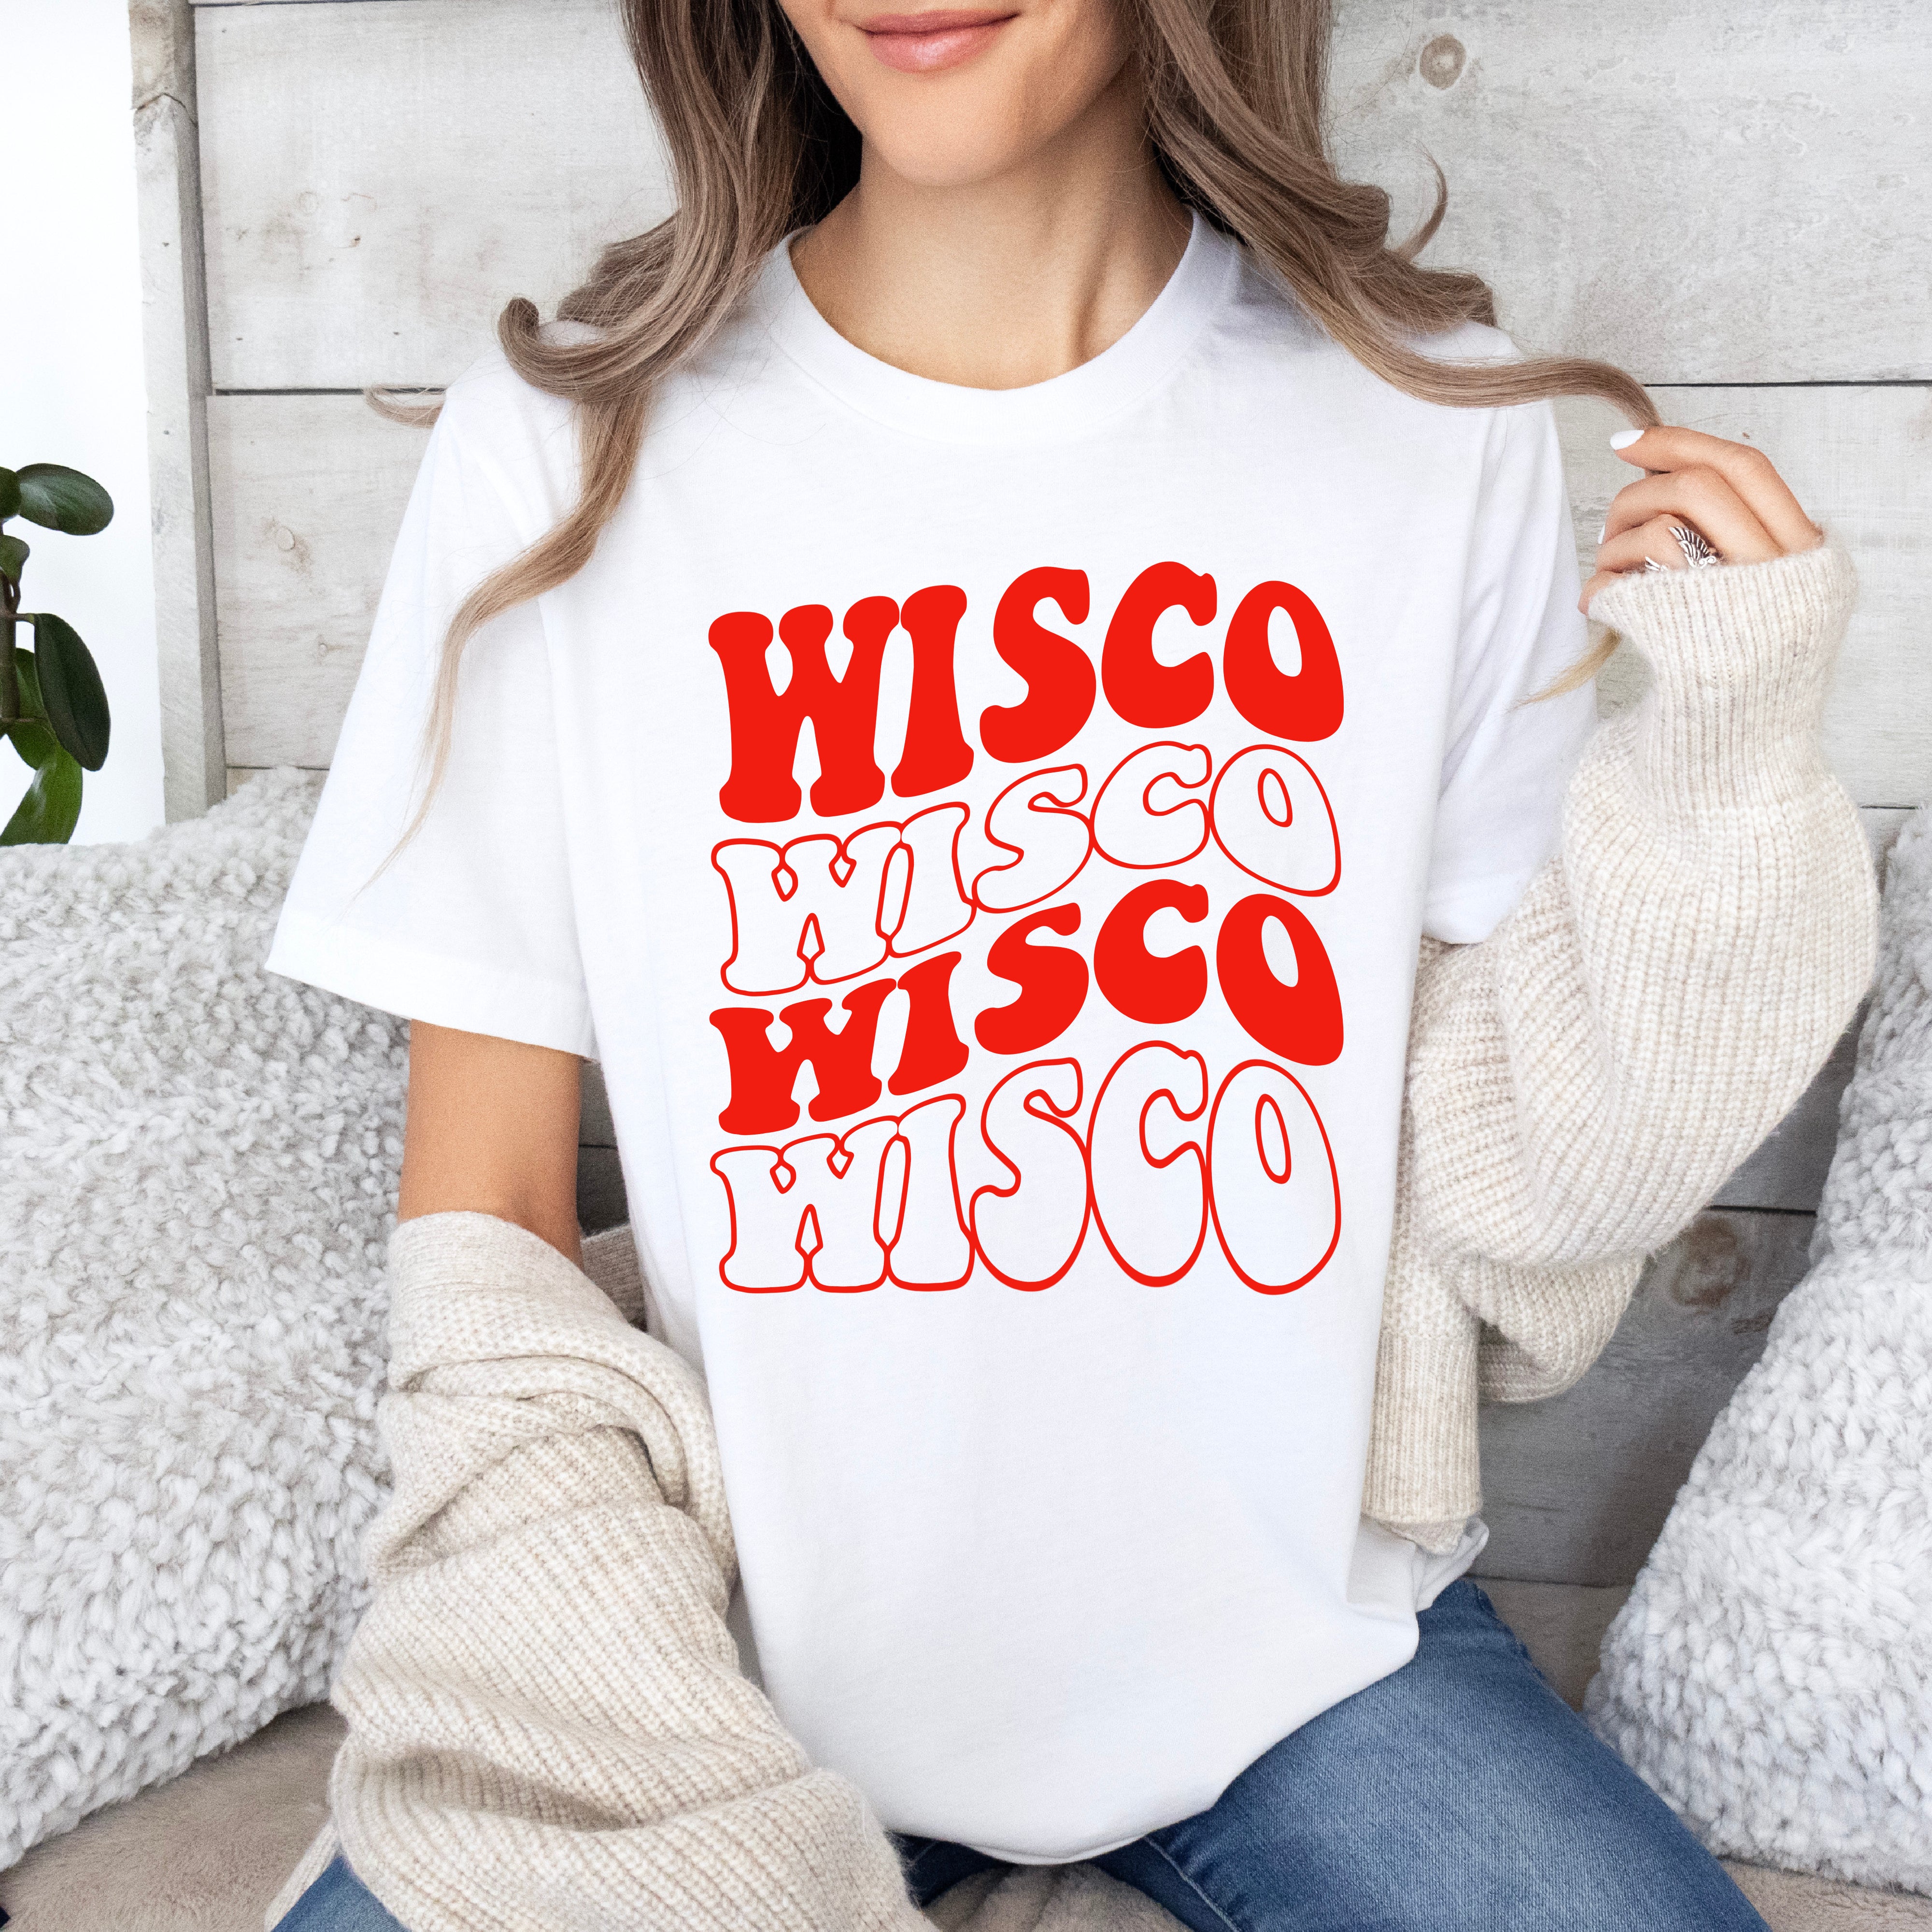 Wisco Tee in Red or White